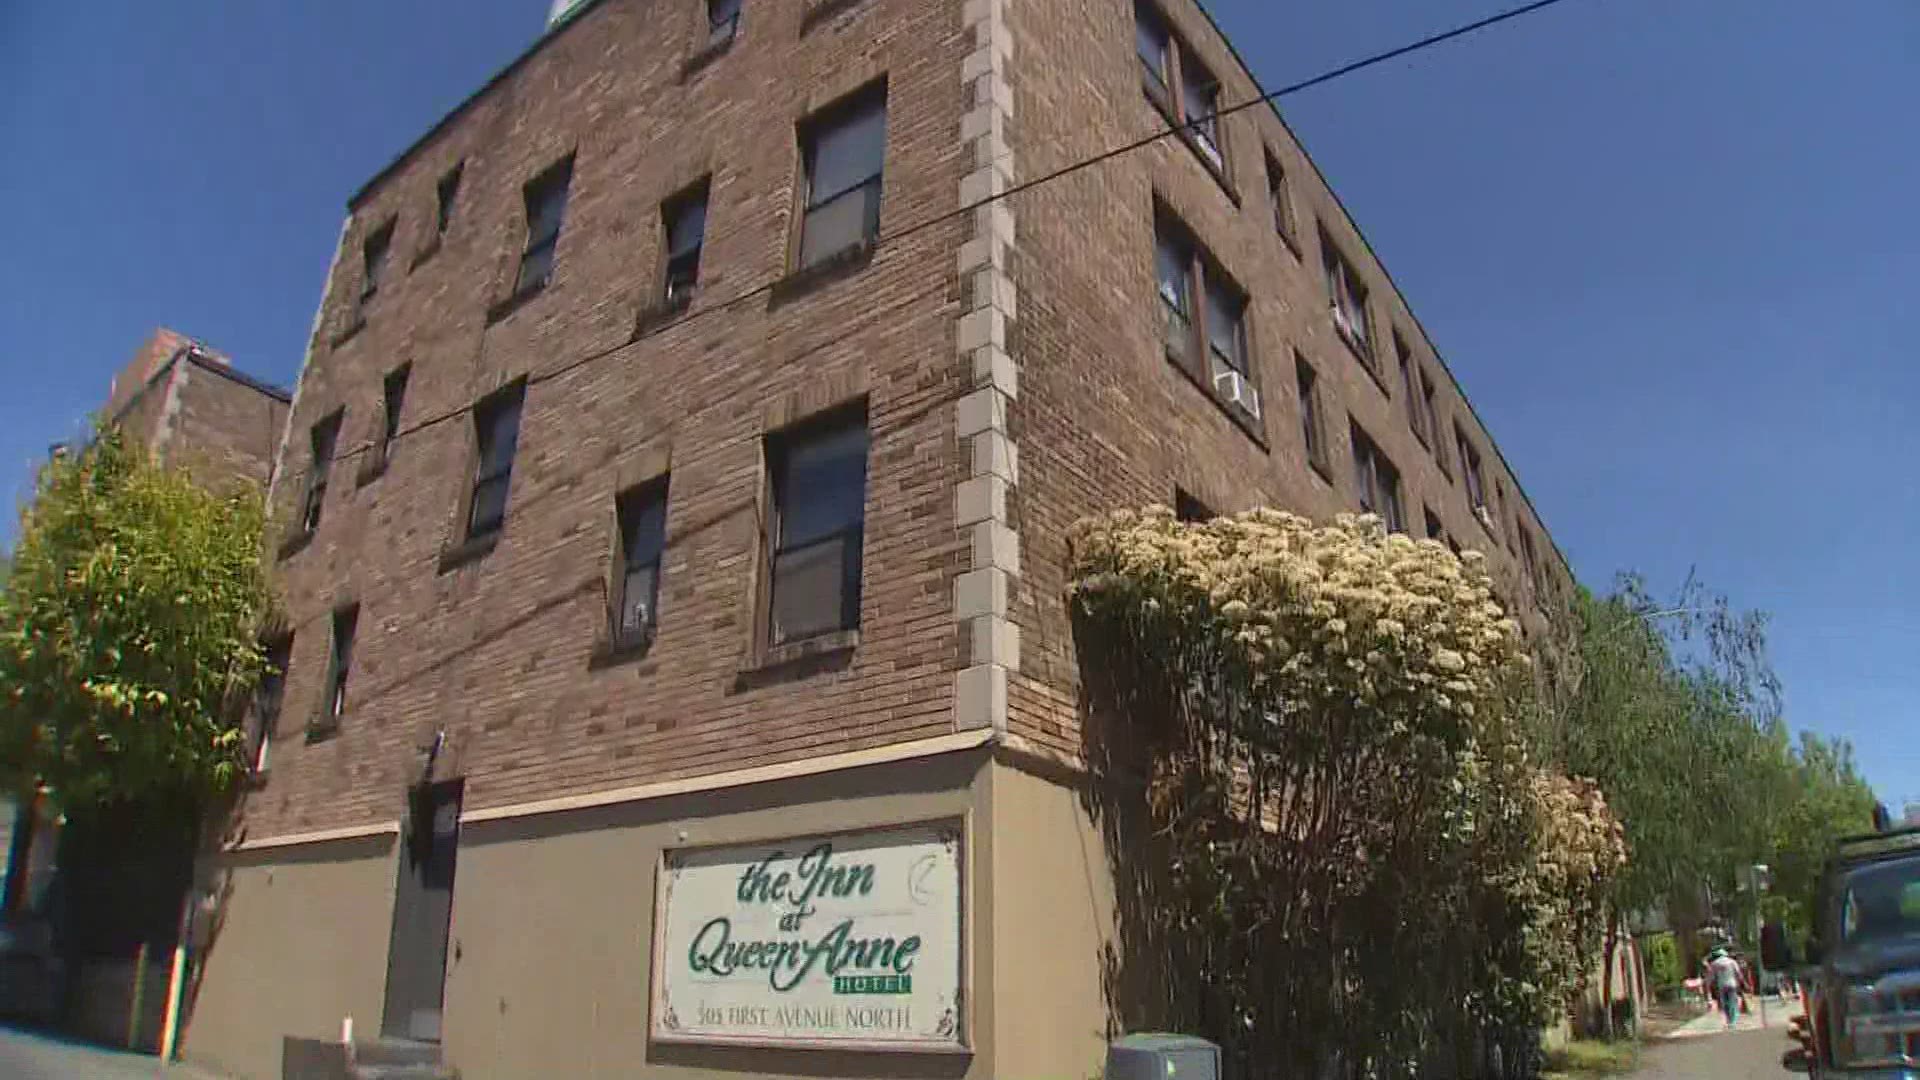 King County purchased the Inn at Queen Anne in Seattle to house the chronically homeless. Funding came from a sales tax that council members approved last fall.